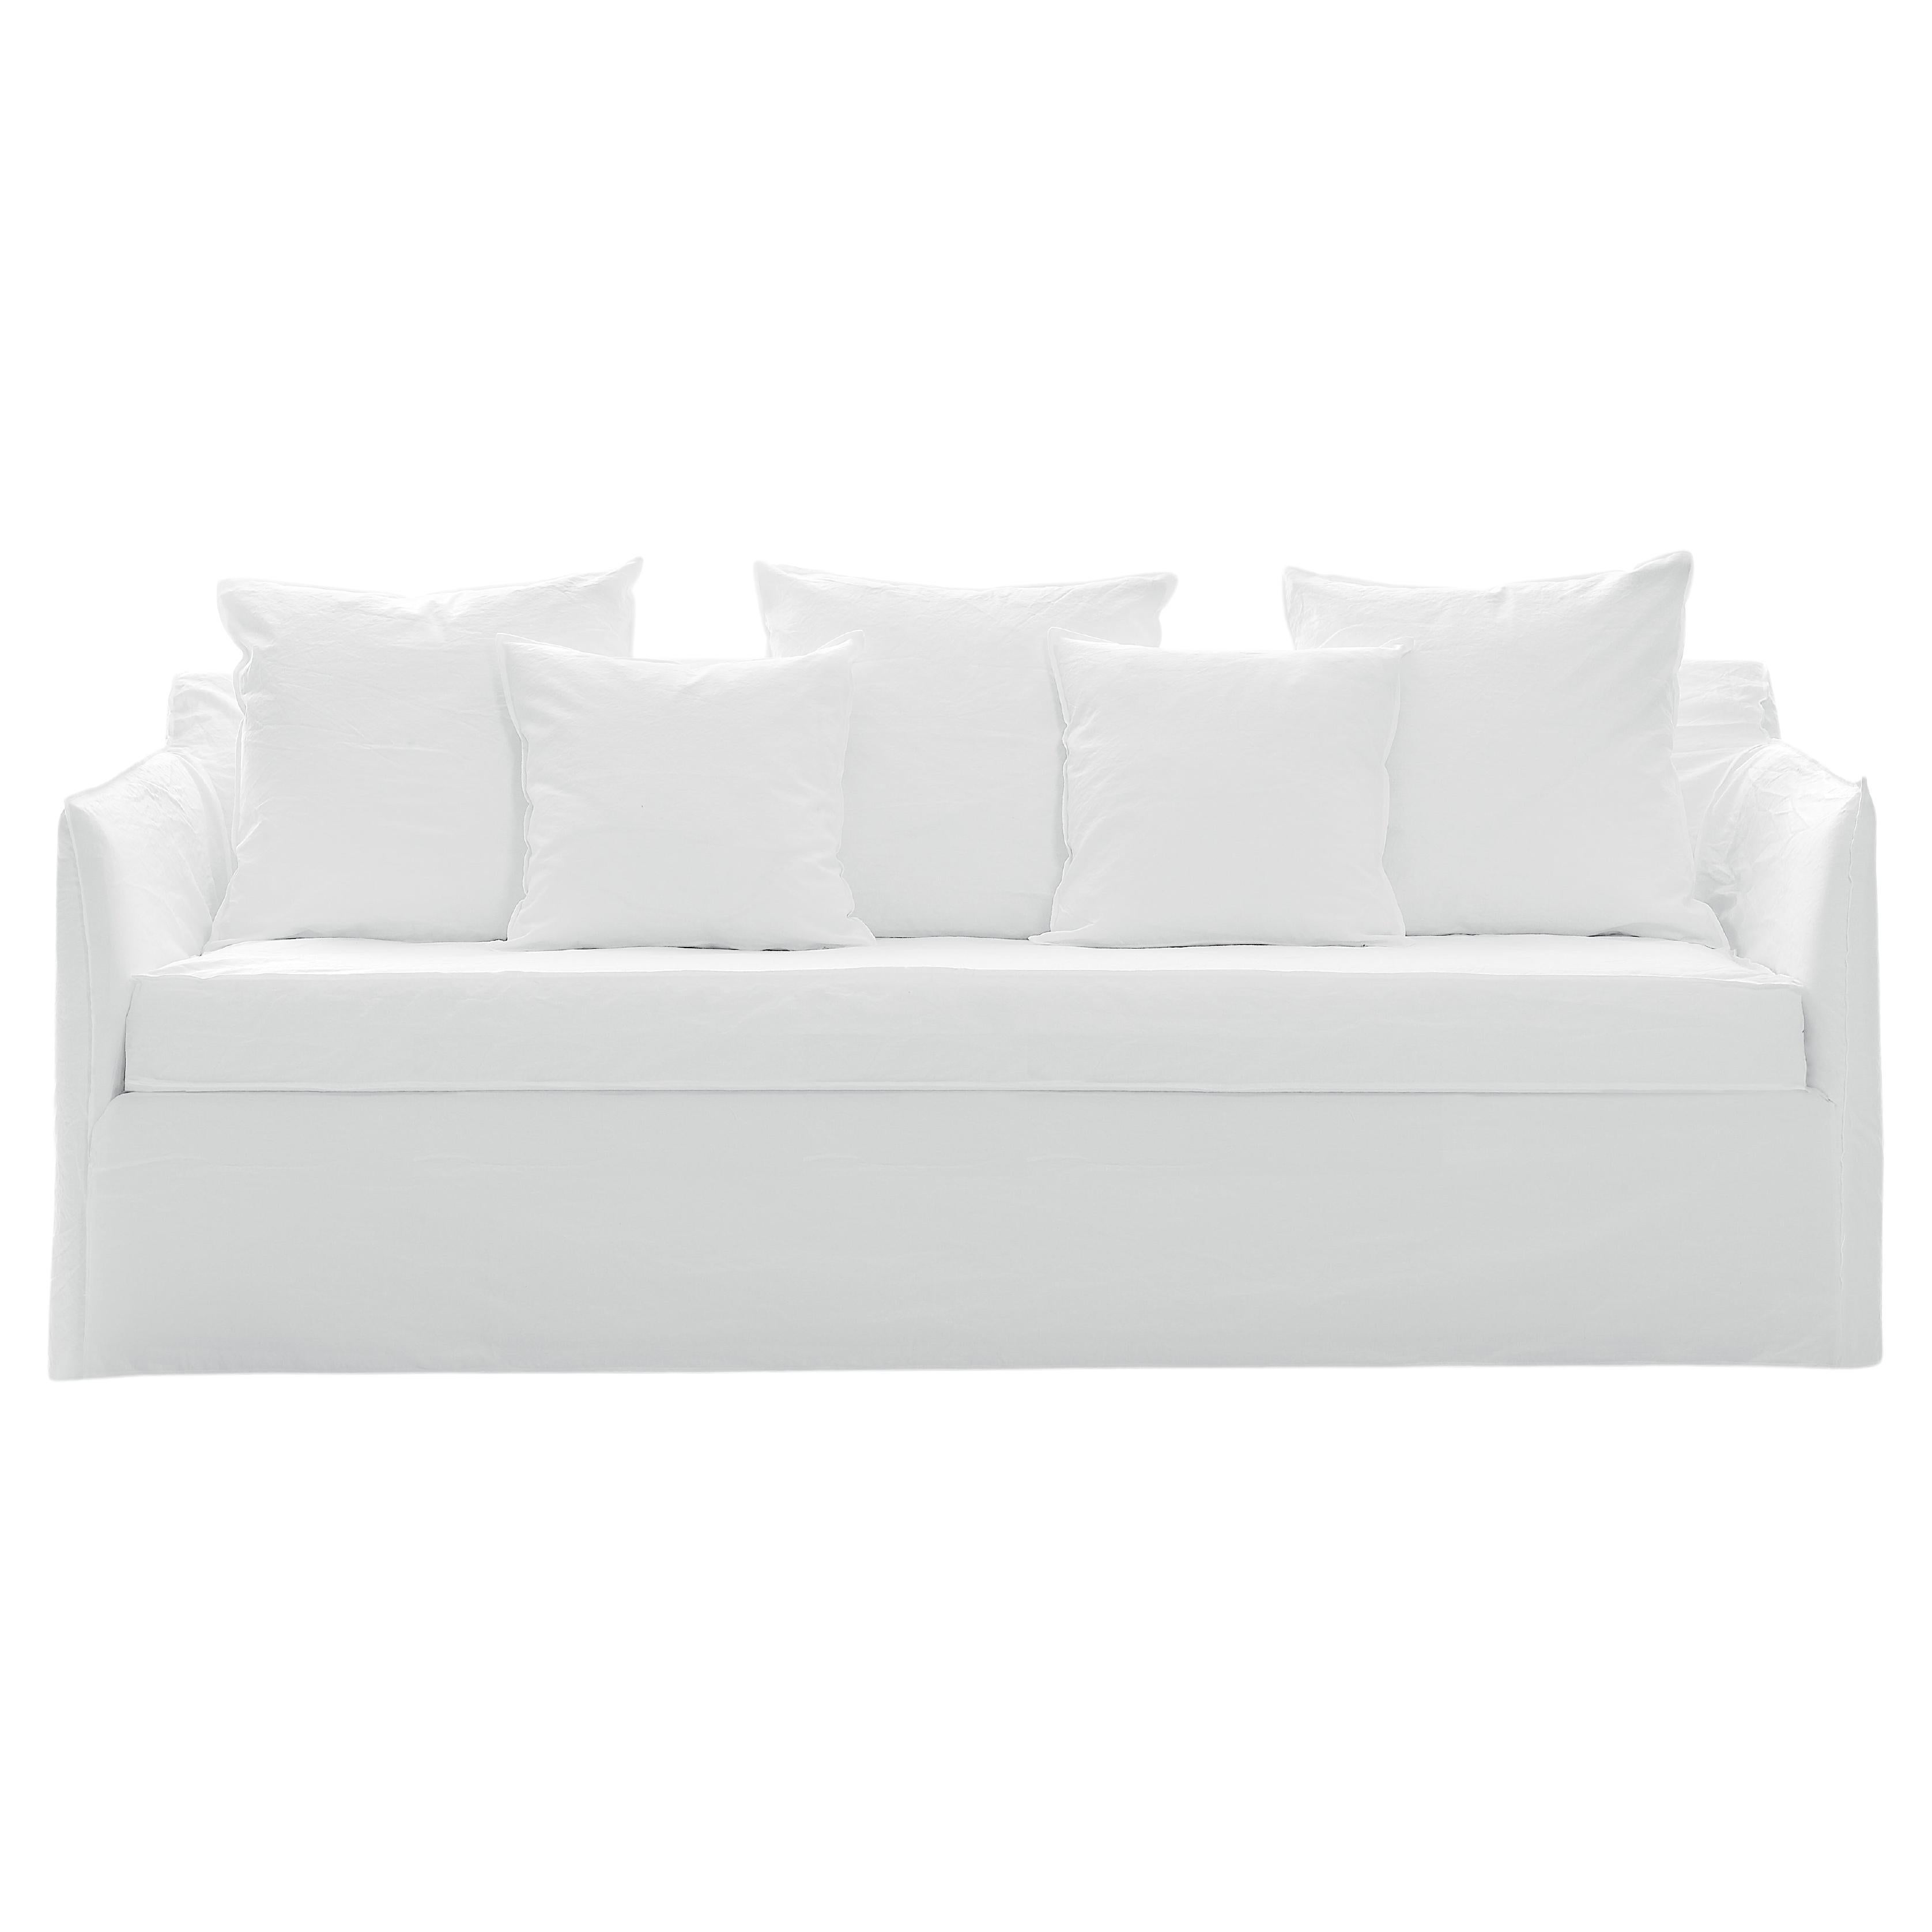 Gervasoni Ghost 19 Sofa in White Linen Upholstery by Paola Navone For Sale